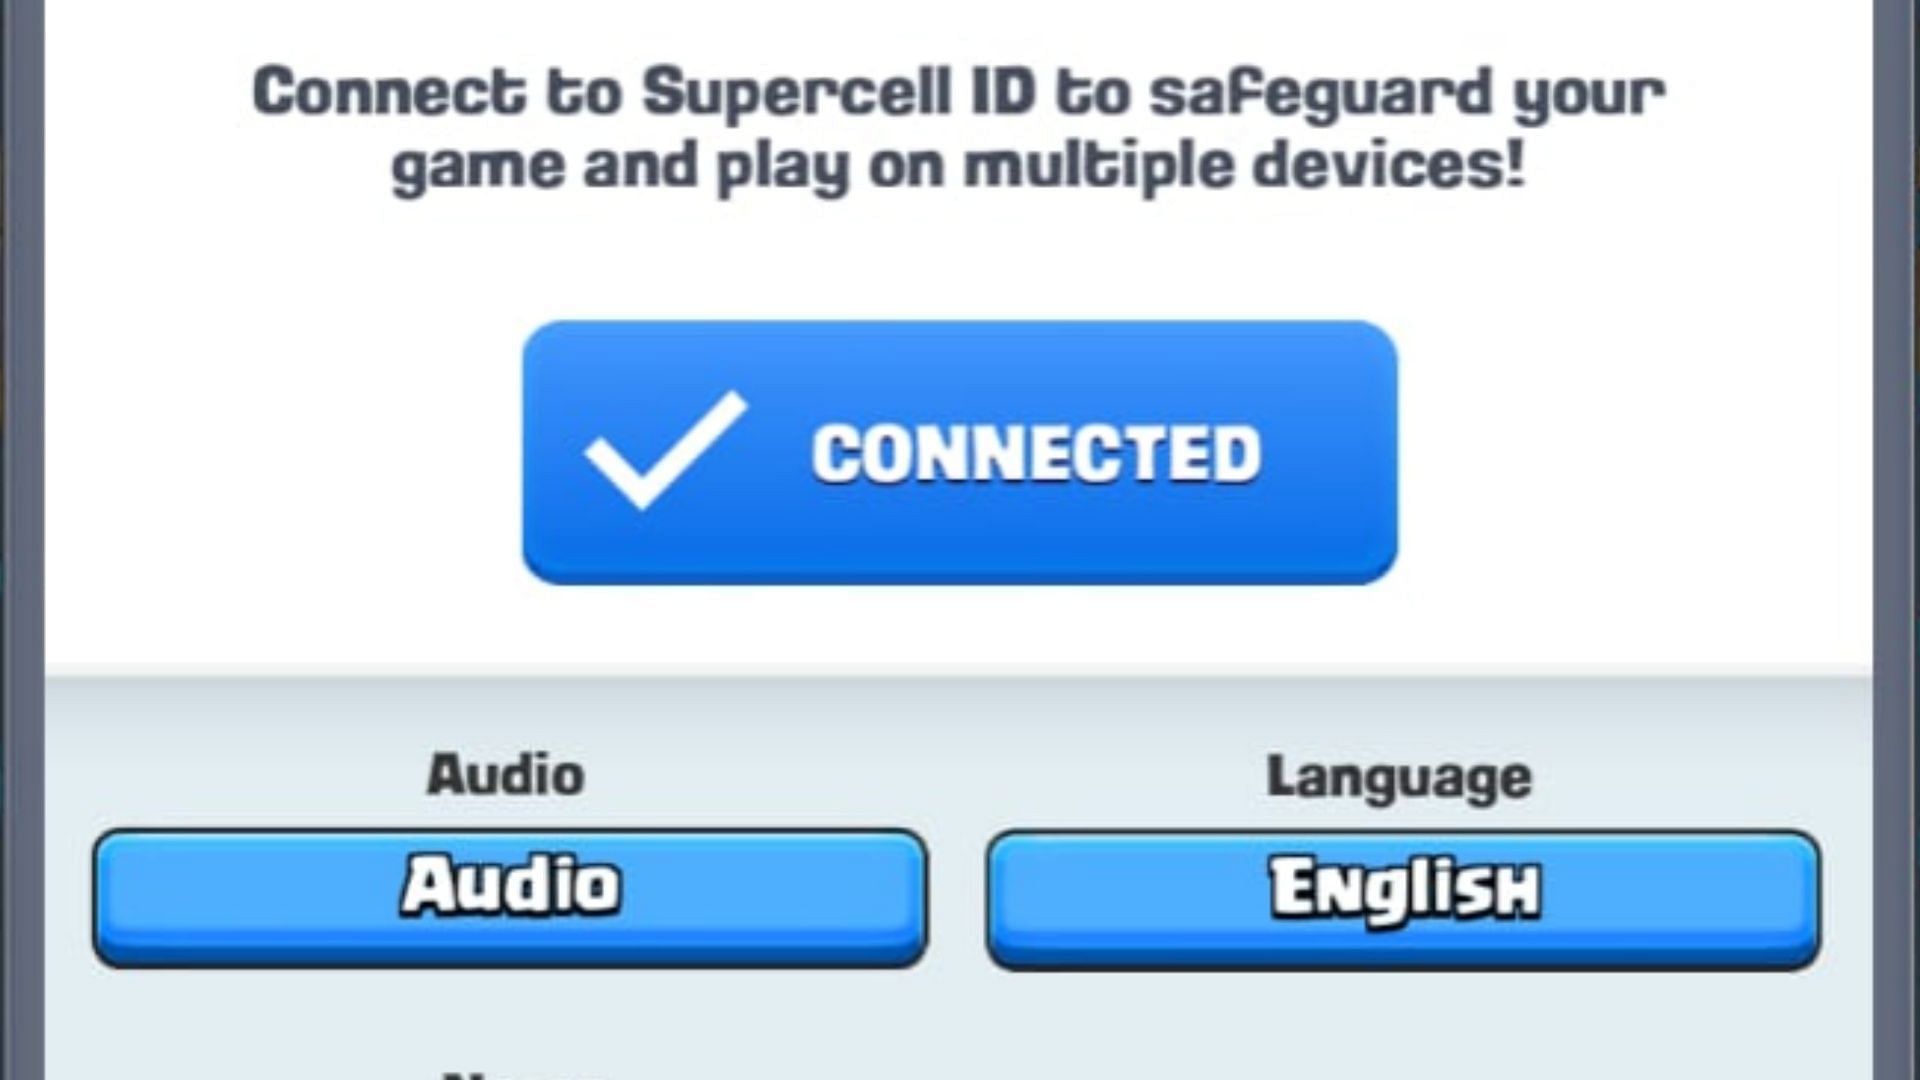 Use this method if you have associated your email with Supercell (Image via Supercell)